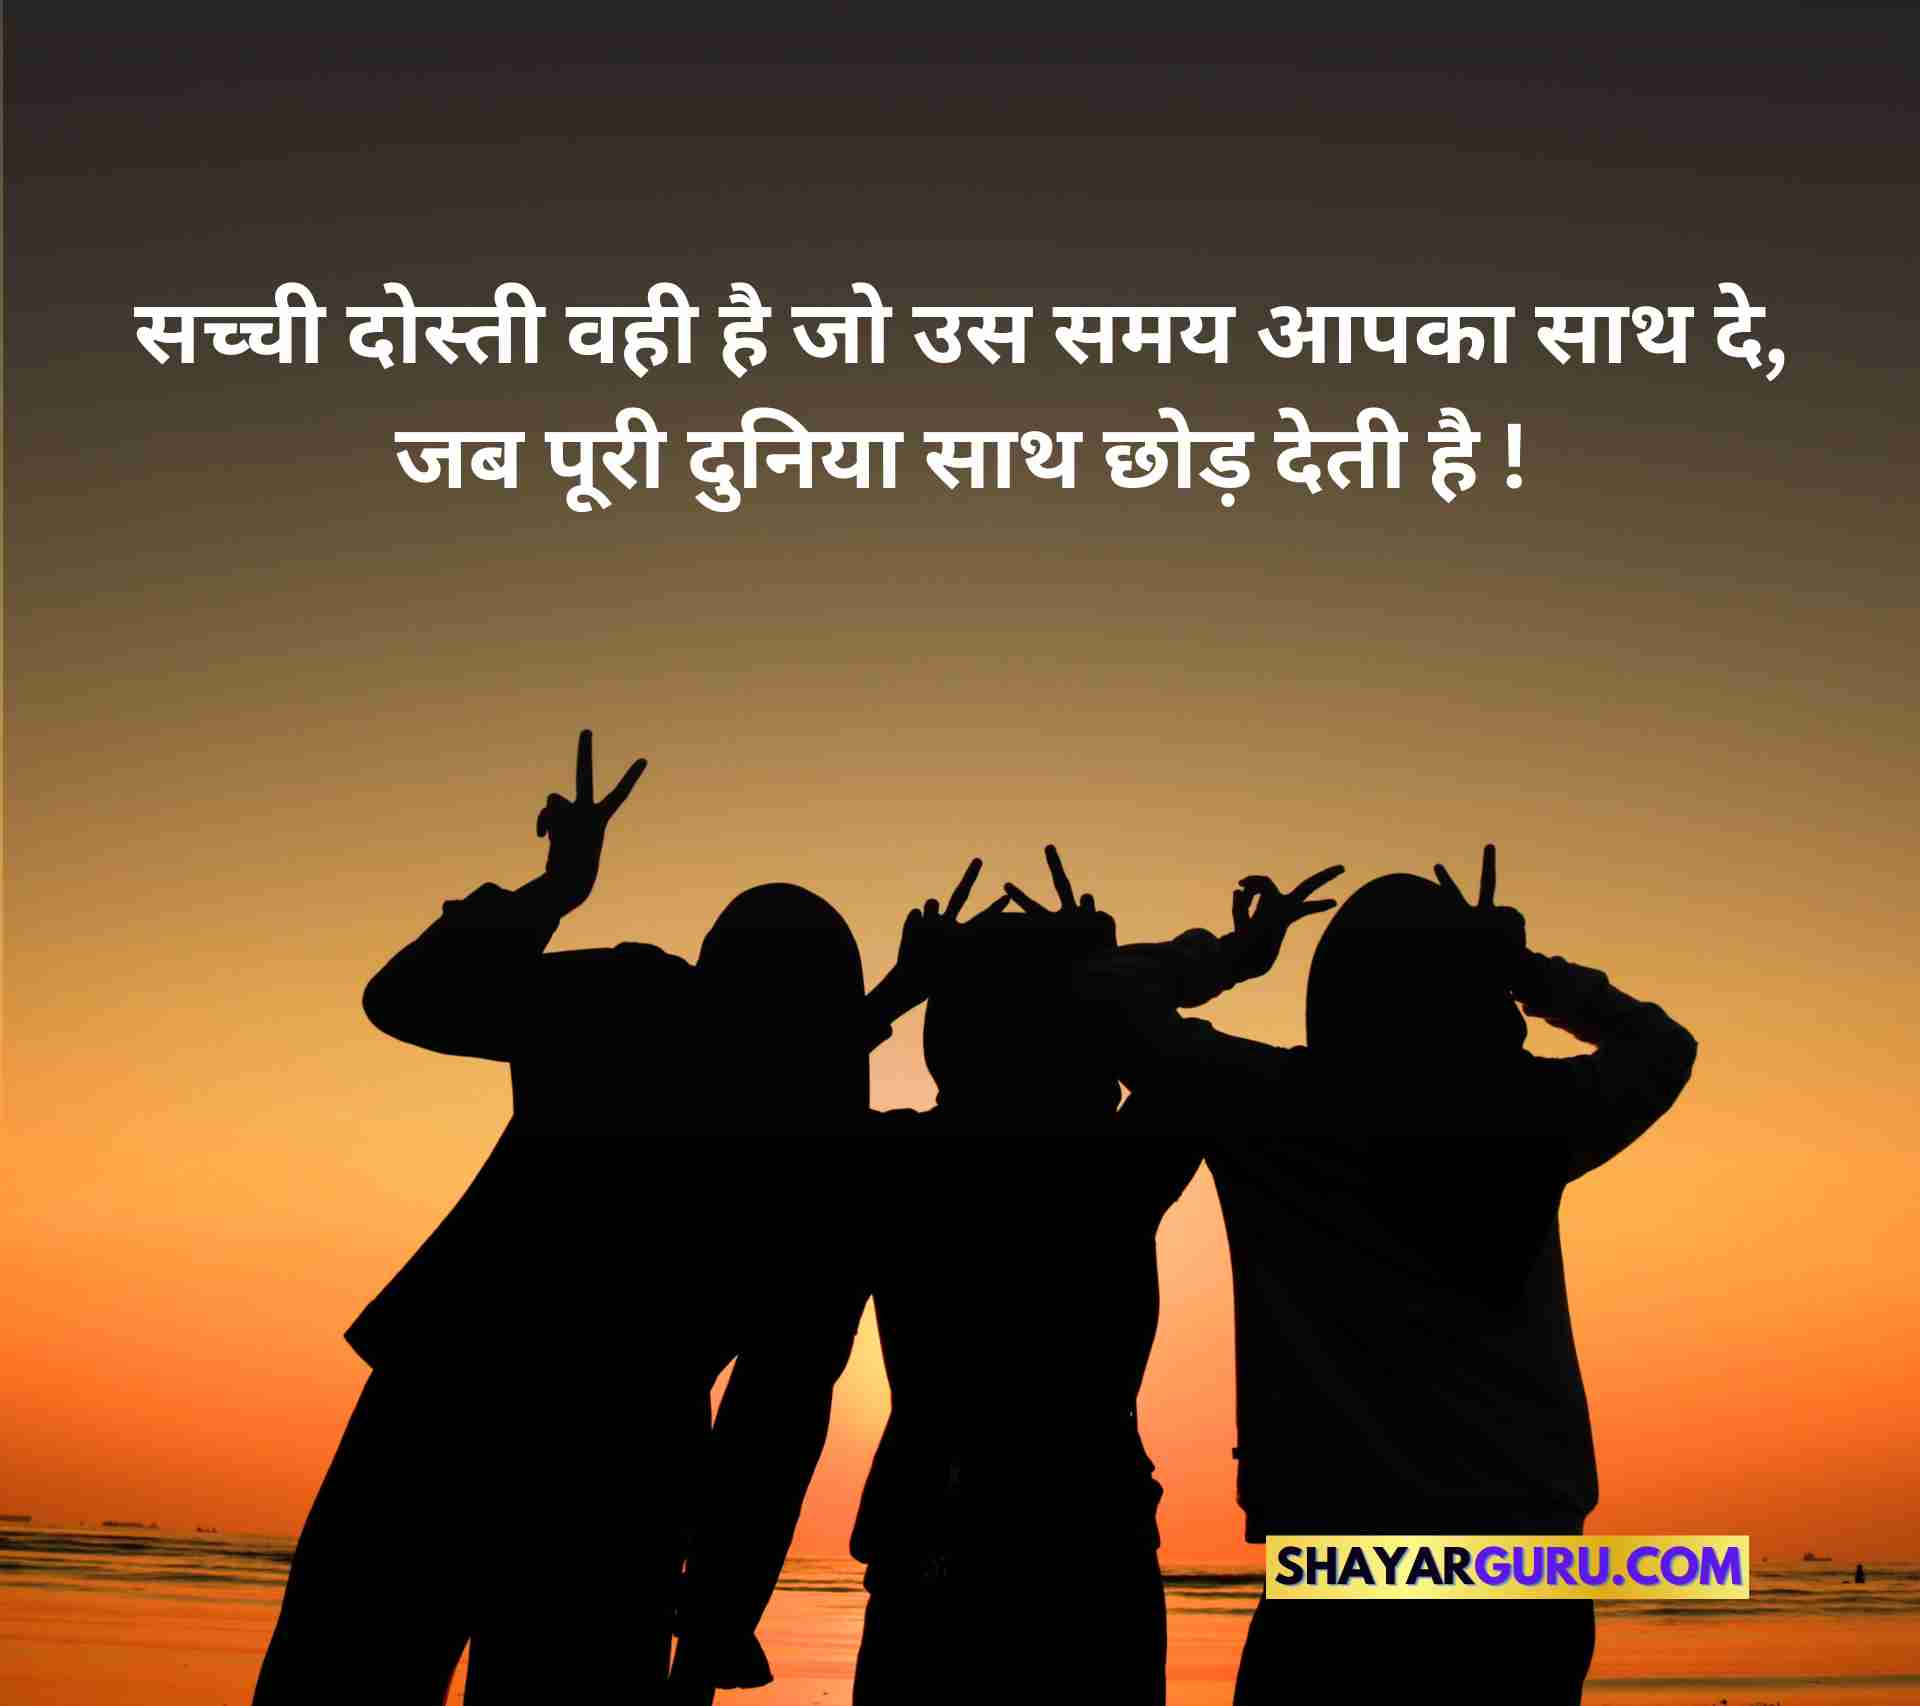 Best Friendship Quotes in Hindi